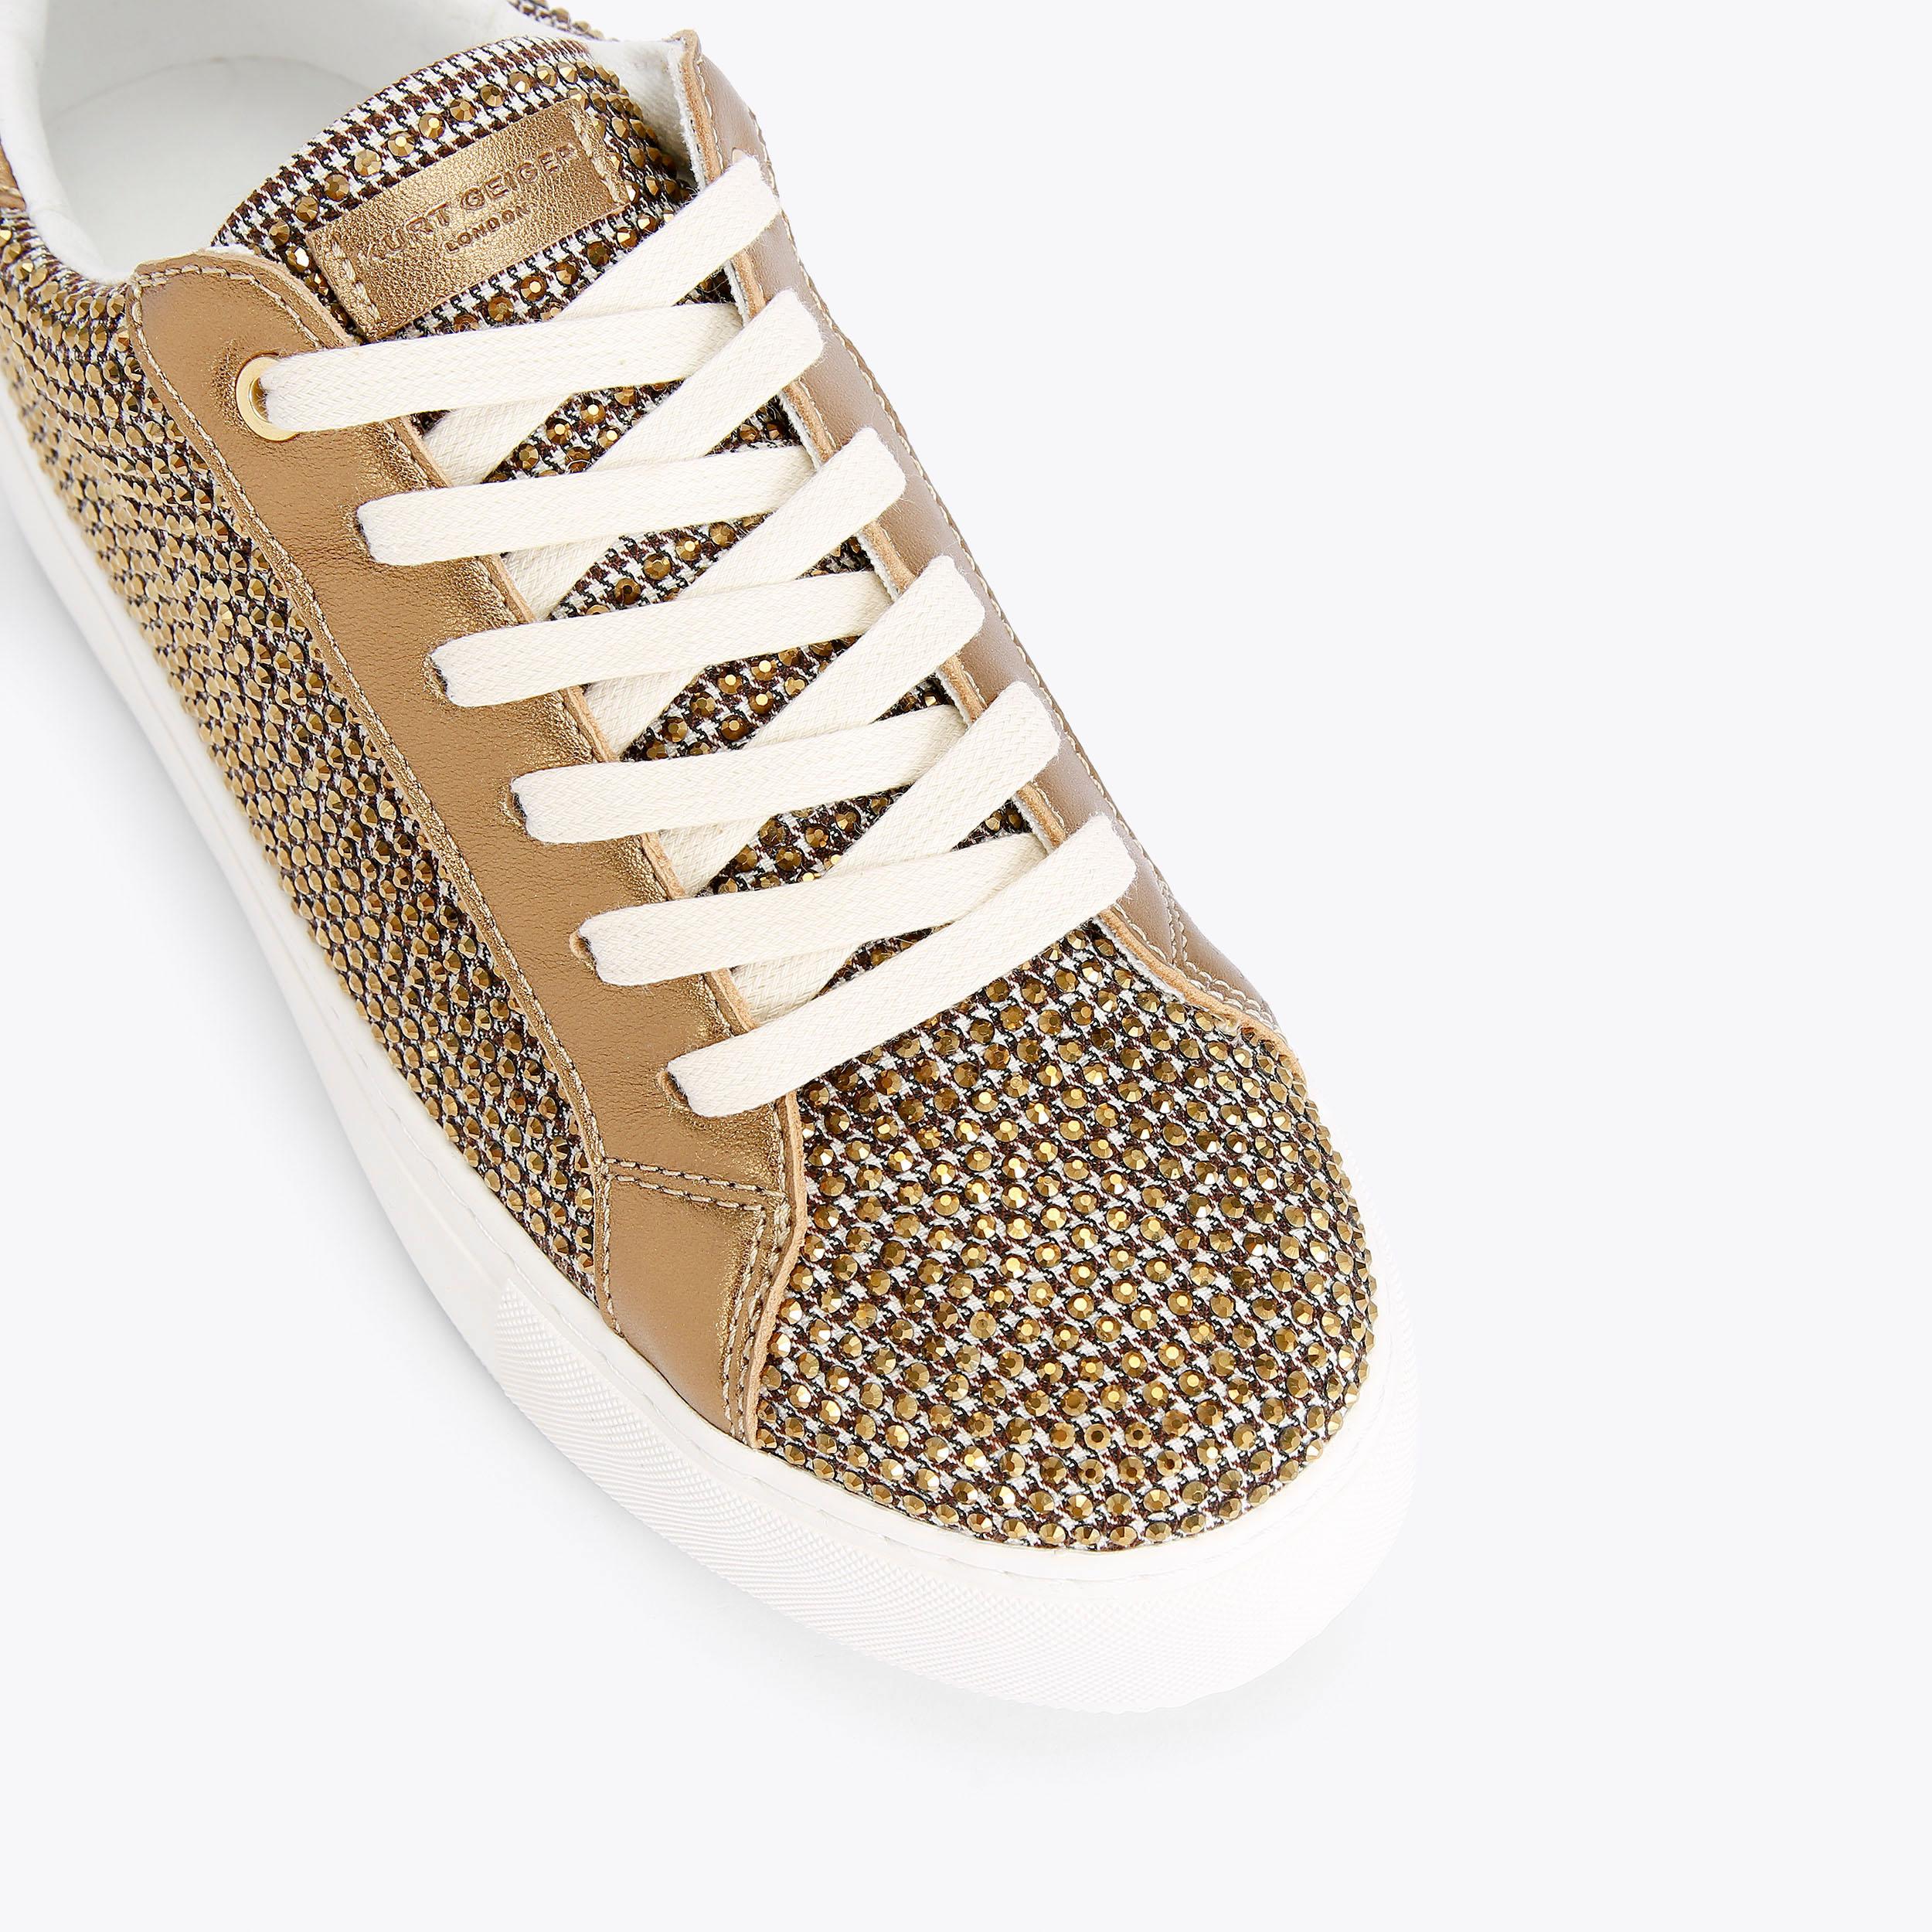 Designer Shoes Fabric Sneaker Woman Trainer Knit Men Shoe Suede Leather  Mesh Sneakers Luxury Gold Silver Nylon Quilted Increasing Laminated  Trainers From Bigbagl, $68.76